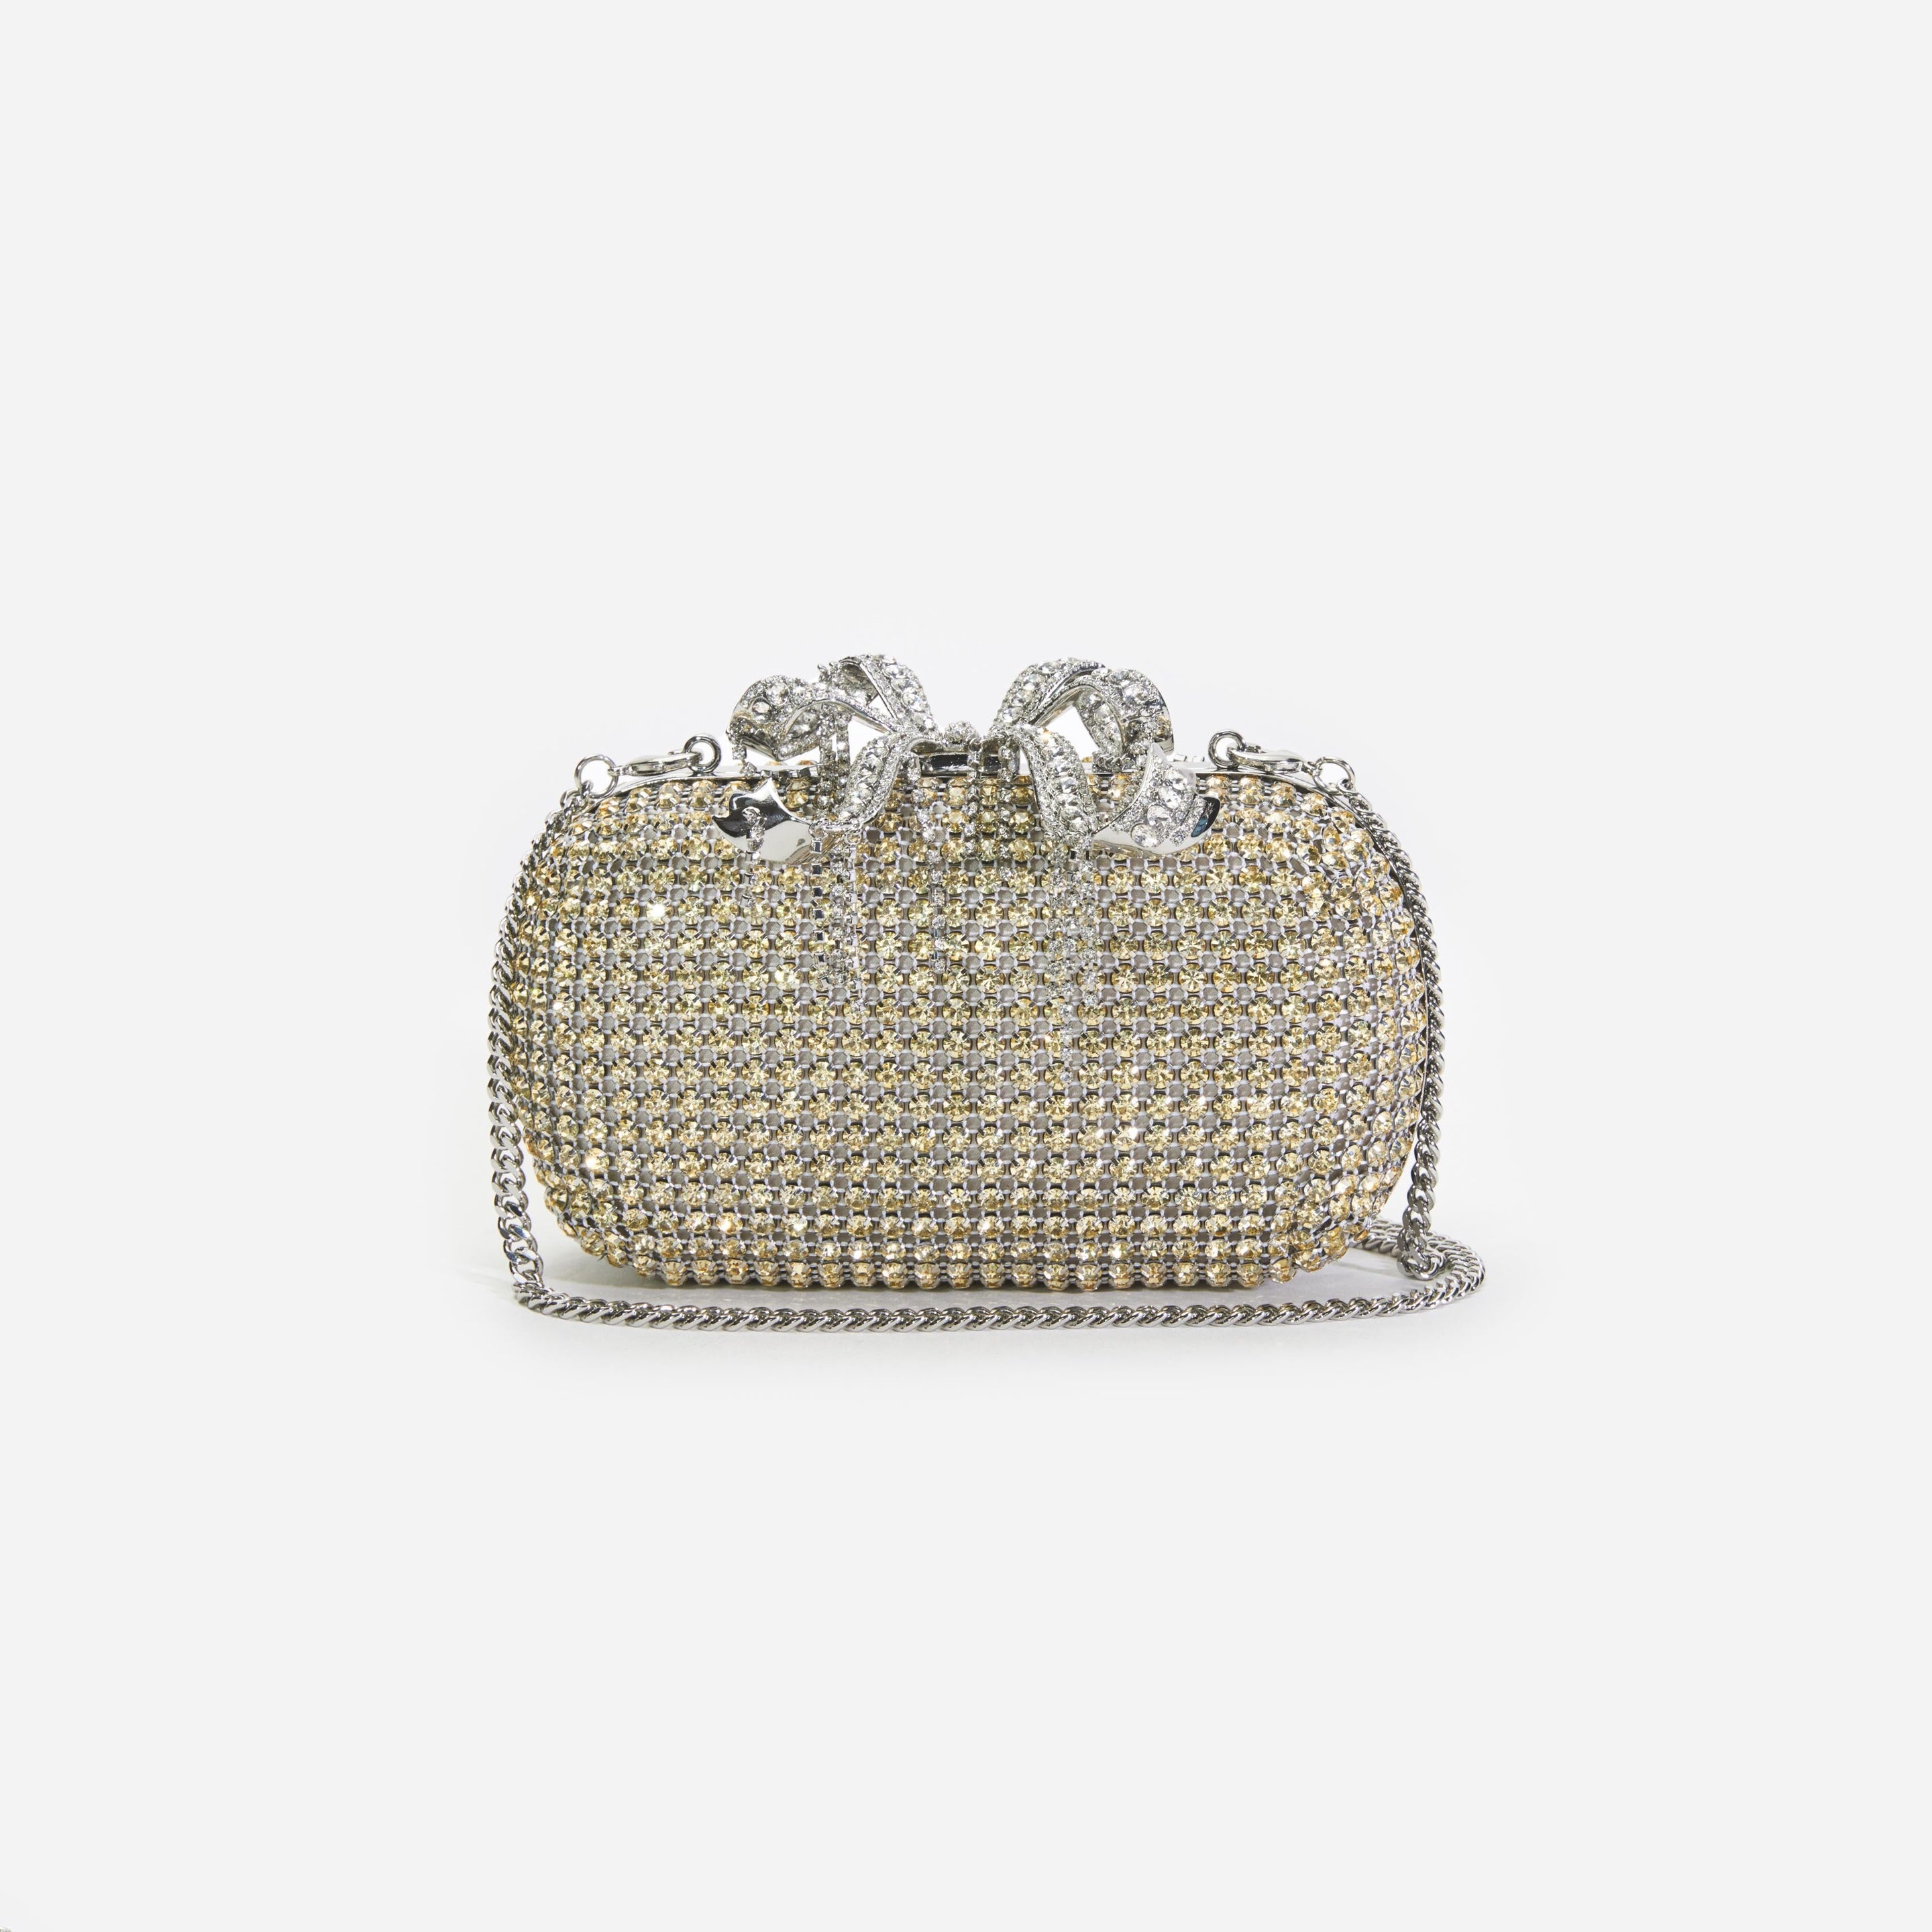 Champagne Chainmail Clutch Bag - 4